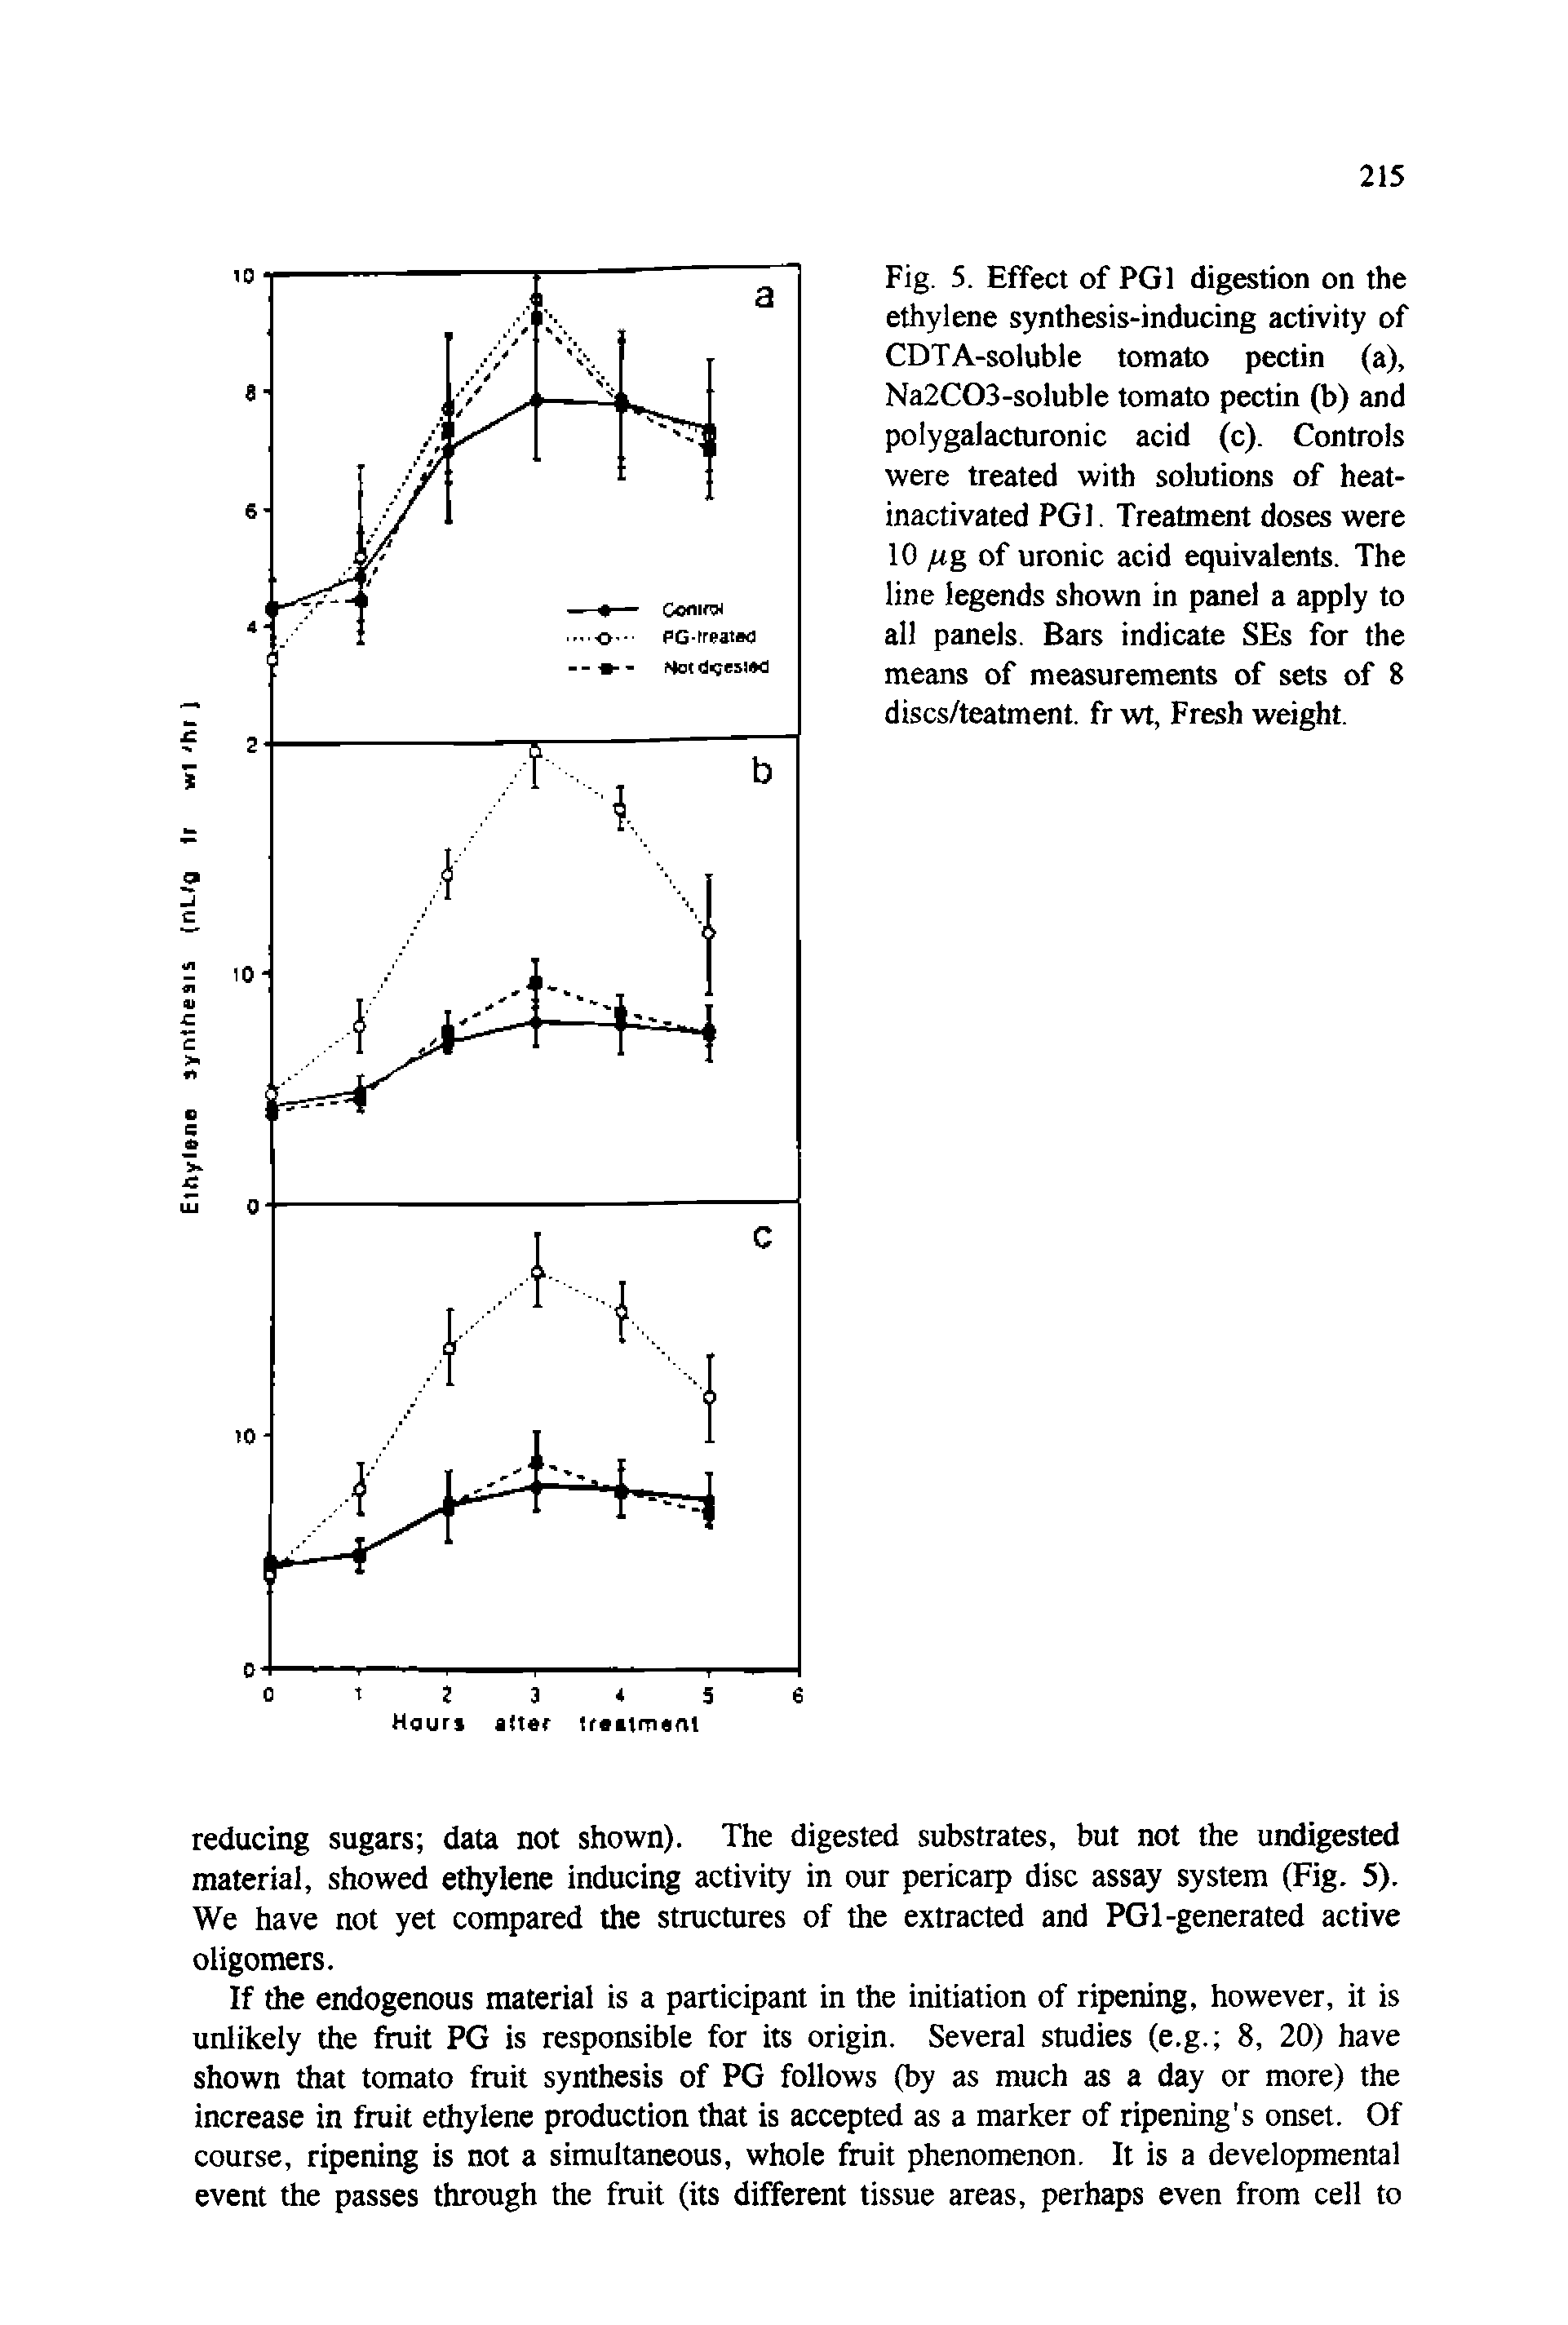 Fig. 5. Effect of PGl digestion on the ethylene synthesis-inducing activity of CDTA-soluble tomato pectin (a), Na2C03-soluble tomato pectin (b) and polygalacturonic acid (c). Controls were treated with solutions of heat-inactivated PGl. Treatment doses were 10 /tg of uronic acid equivalents. The line legends shown in panel a apply to all panels. Bars indicate SEs for the means of measurements of sets of 8 discs/teatment. fr wt, Fresh weight.